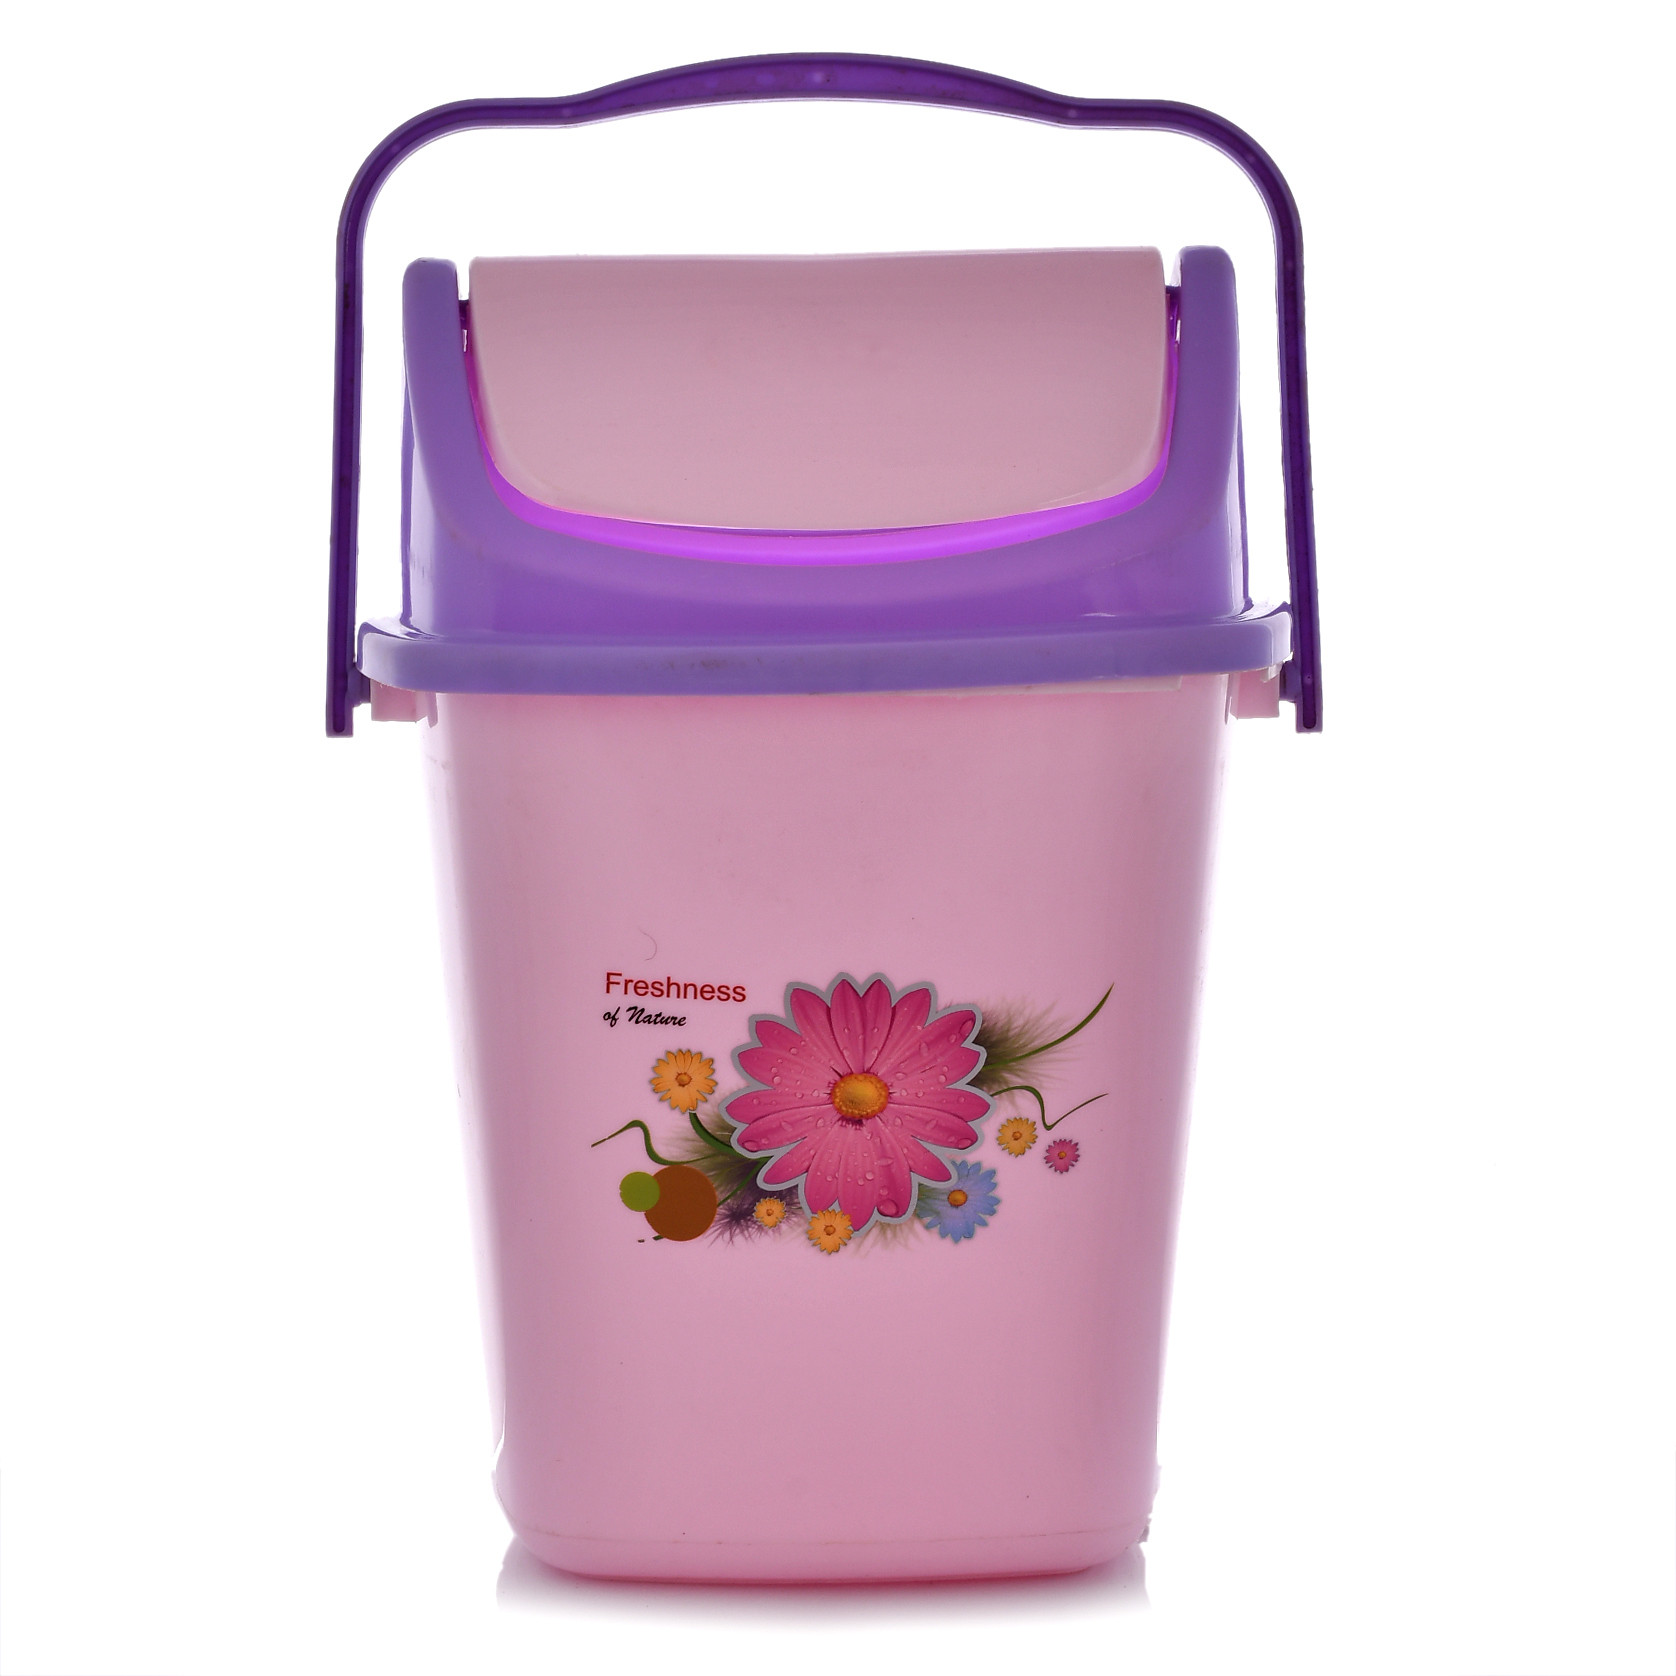 Kuber Industries 3 Pieces Pluto Plastic Swing Printed Garbage Waste Dustbin for Home, Office with Handle, 5 Liters (Cream & Blue & Purple)-KUBMART3110